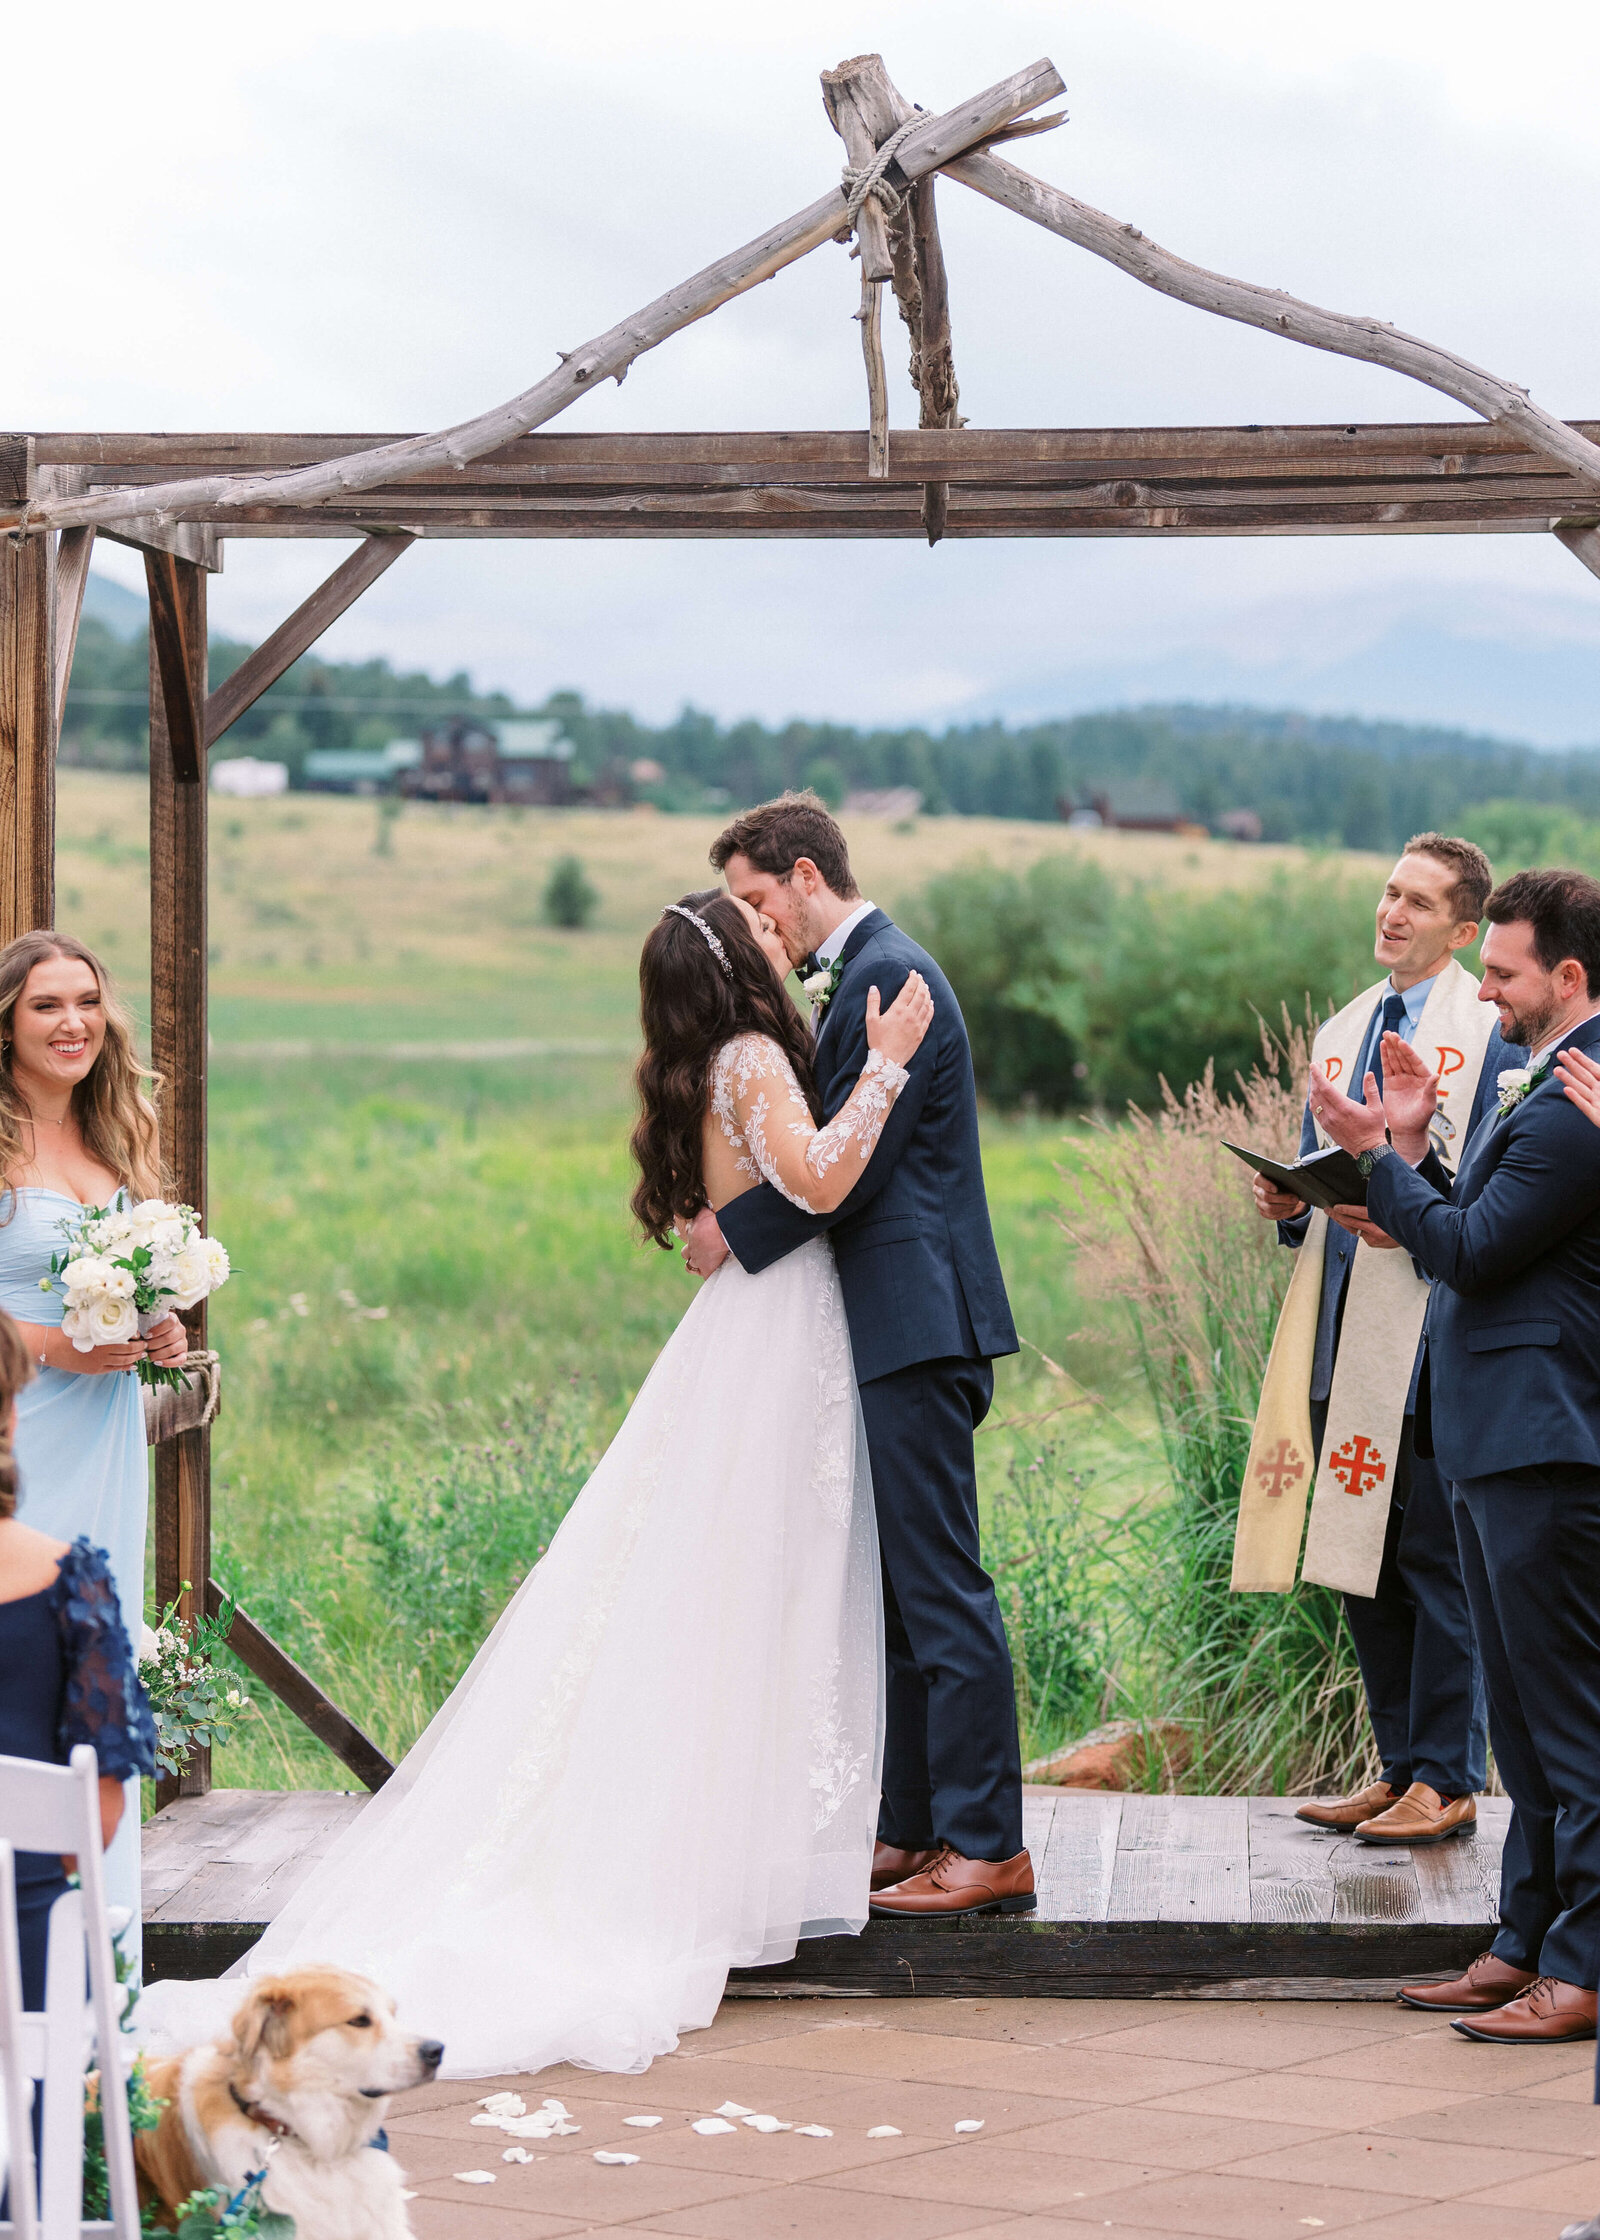 groom in navy and bride with long brown hair kissing at the alter with the mountains in the background and wedding party clapping